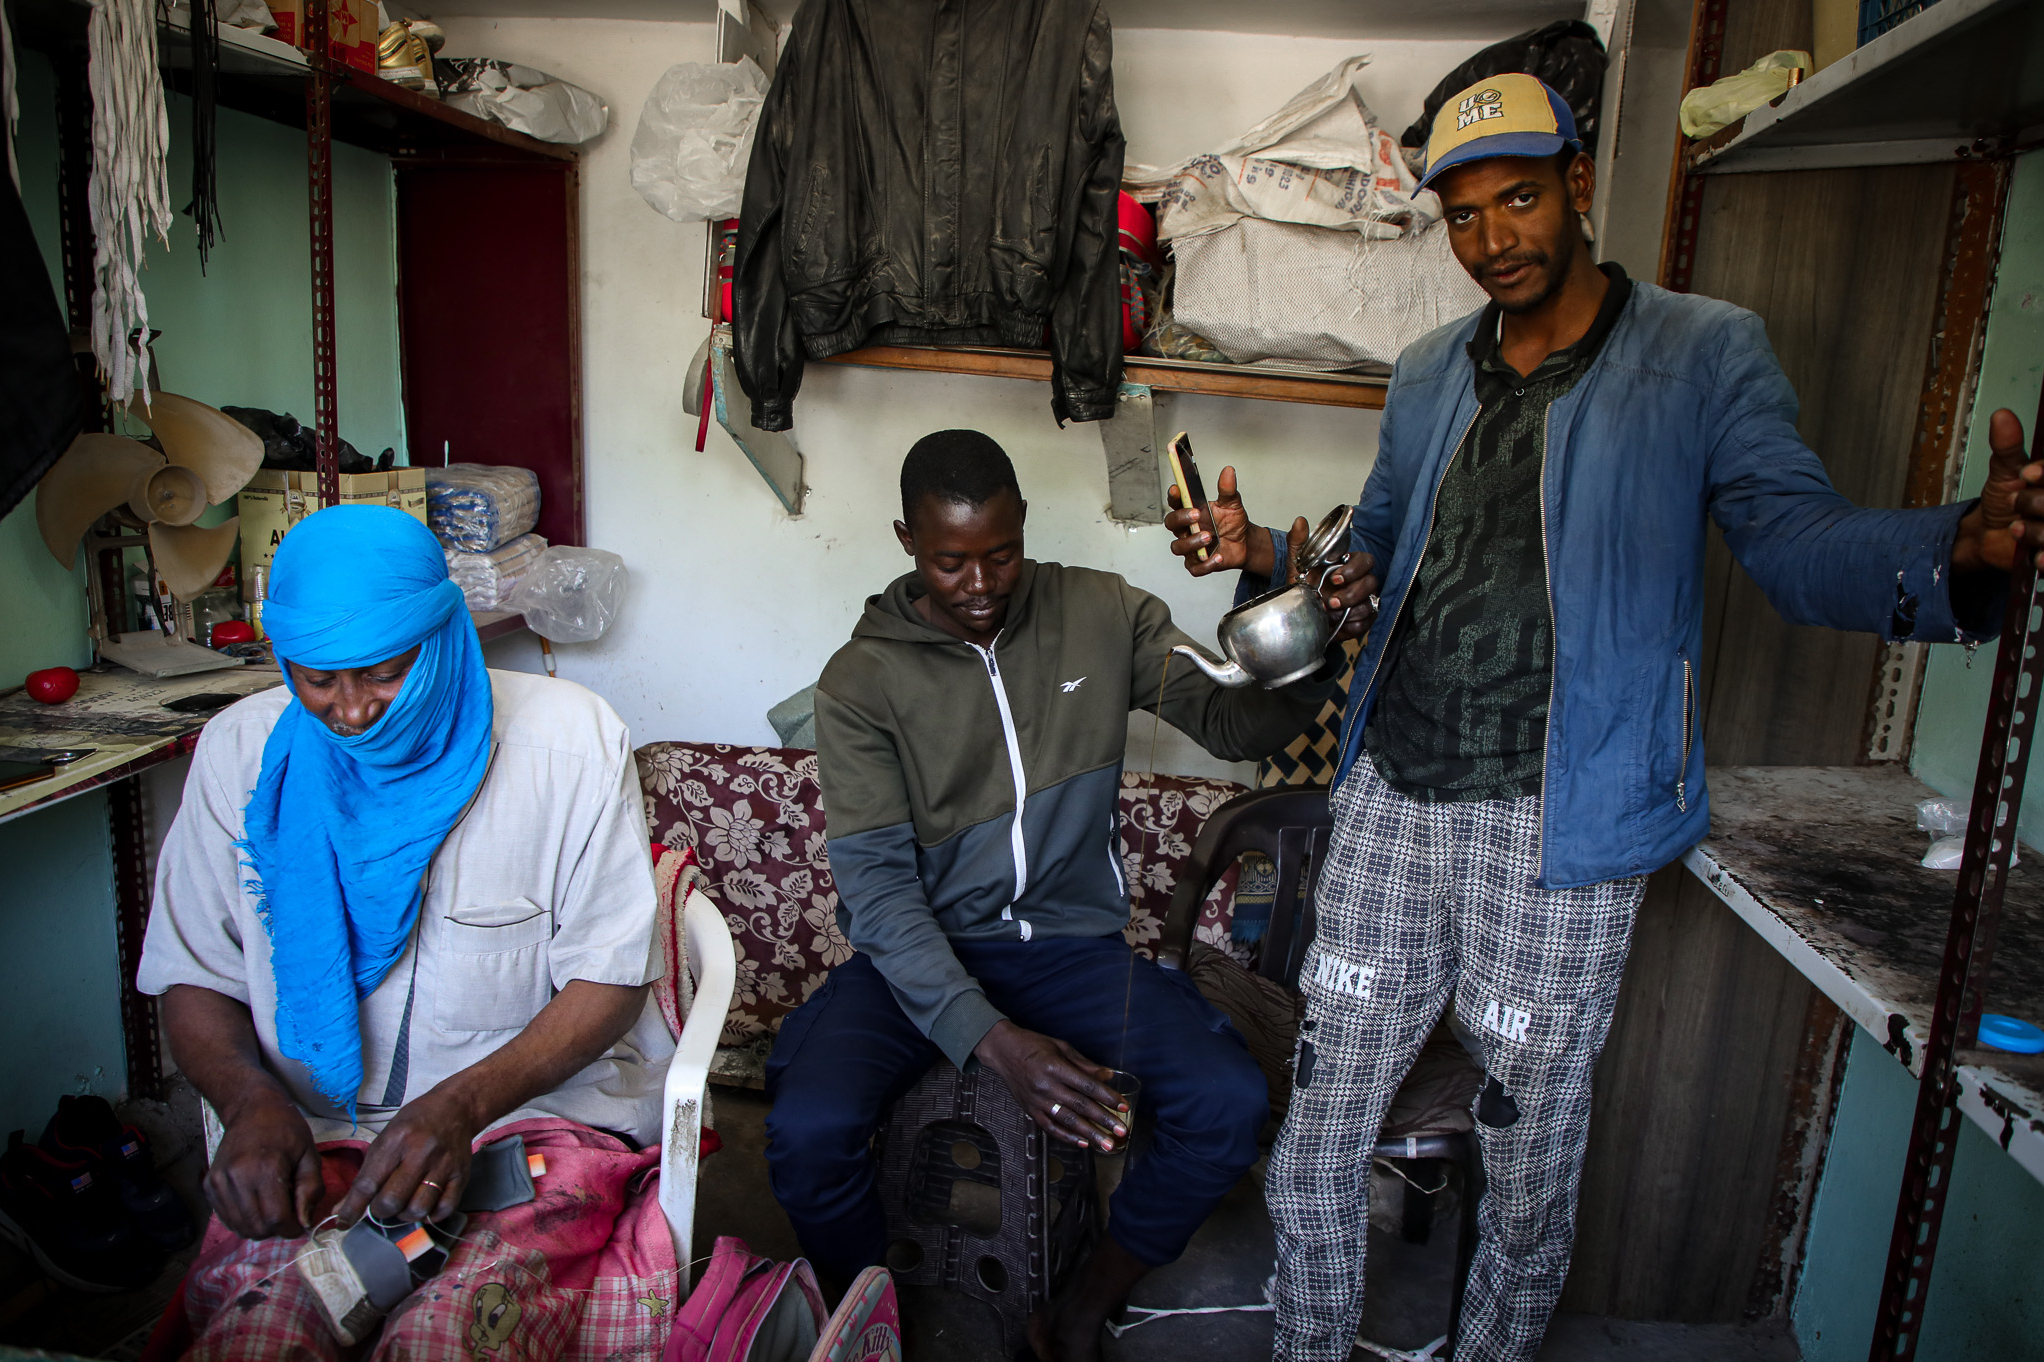 Three migrant workers in Tripoli, Libya, at a sales stall. A man with a bright blue turban is working on a shoe, one is preparing tea and another is looking at the camera with a mobile phone in his hand.